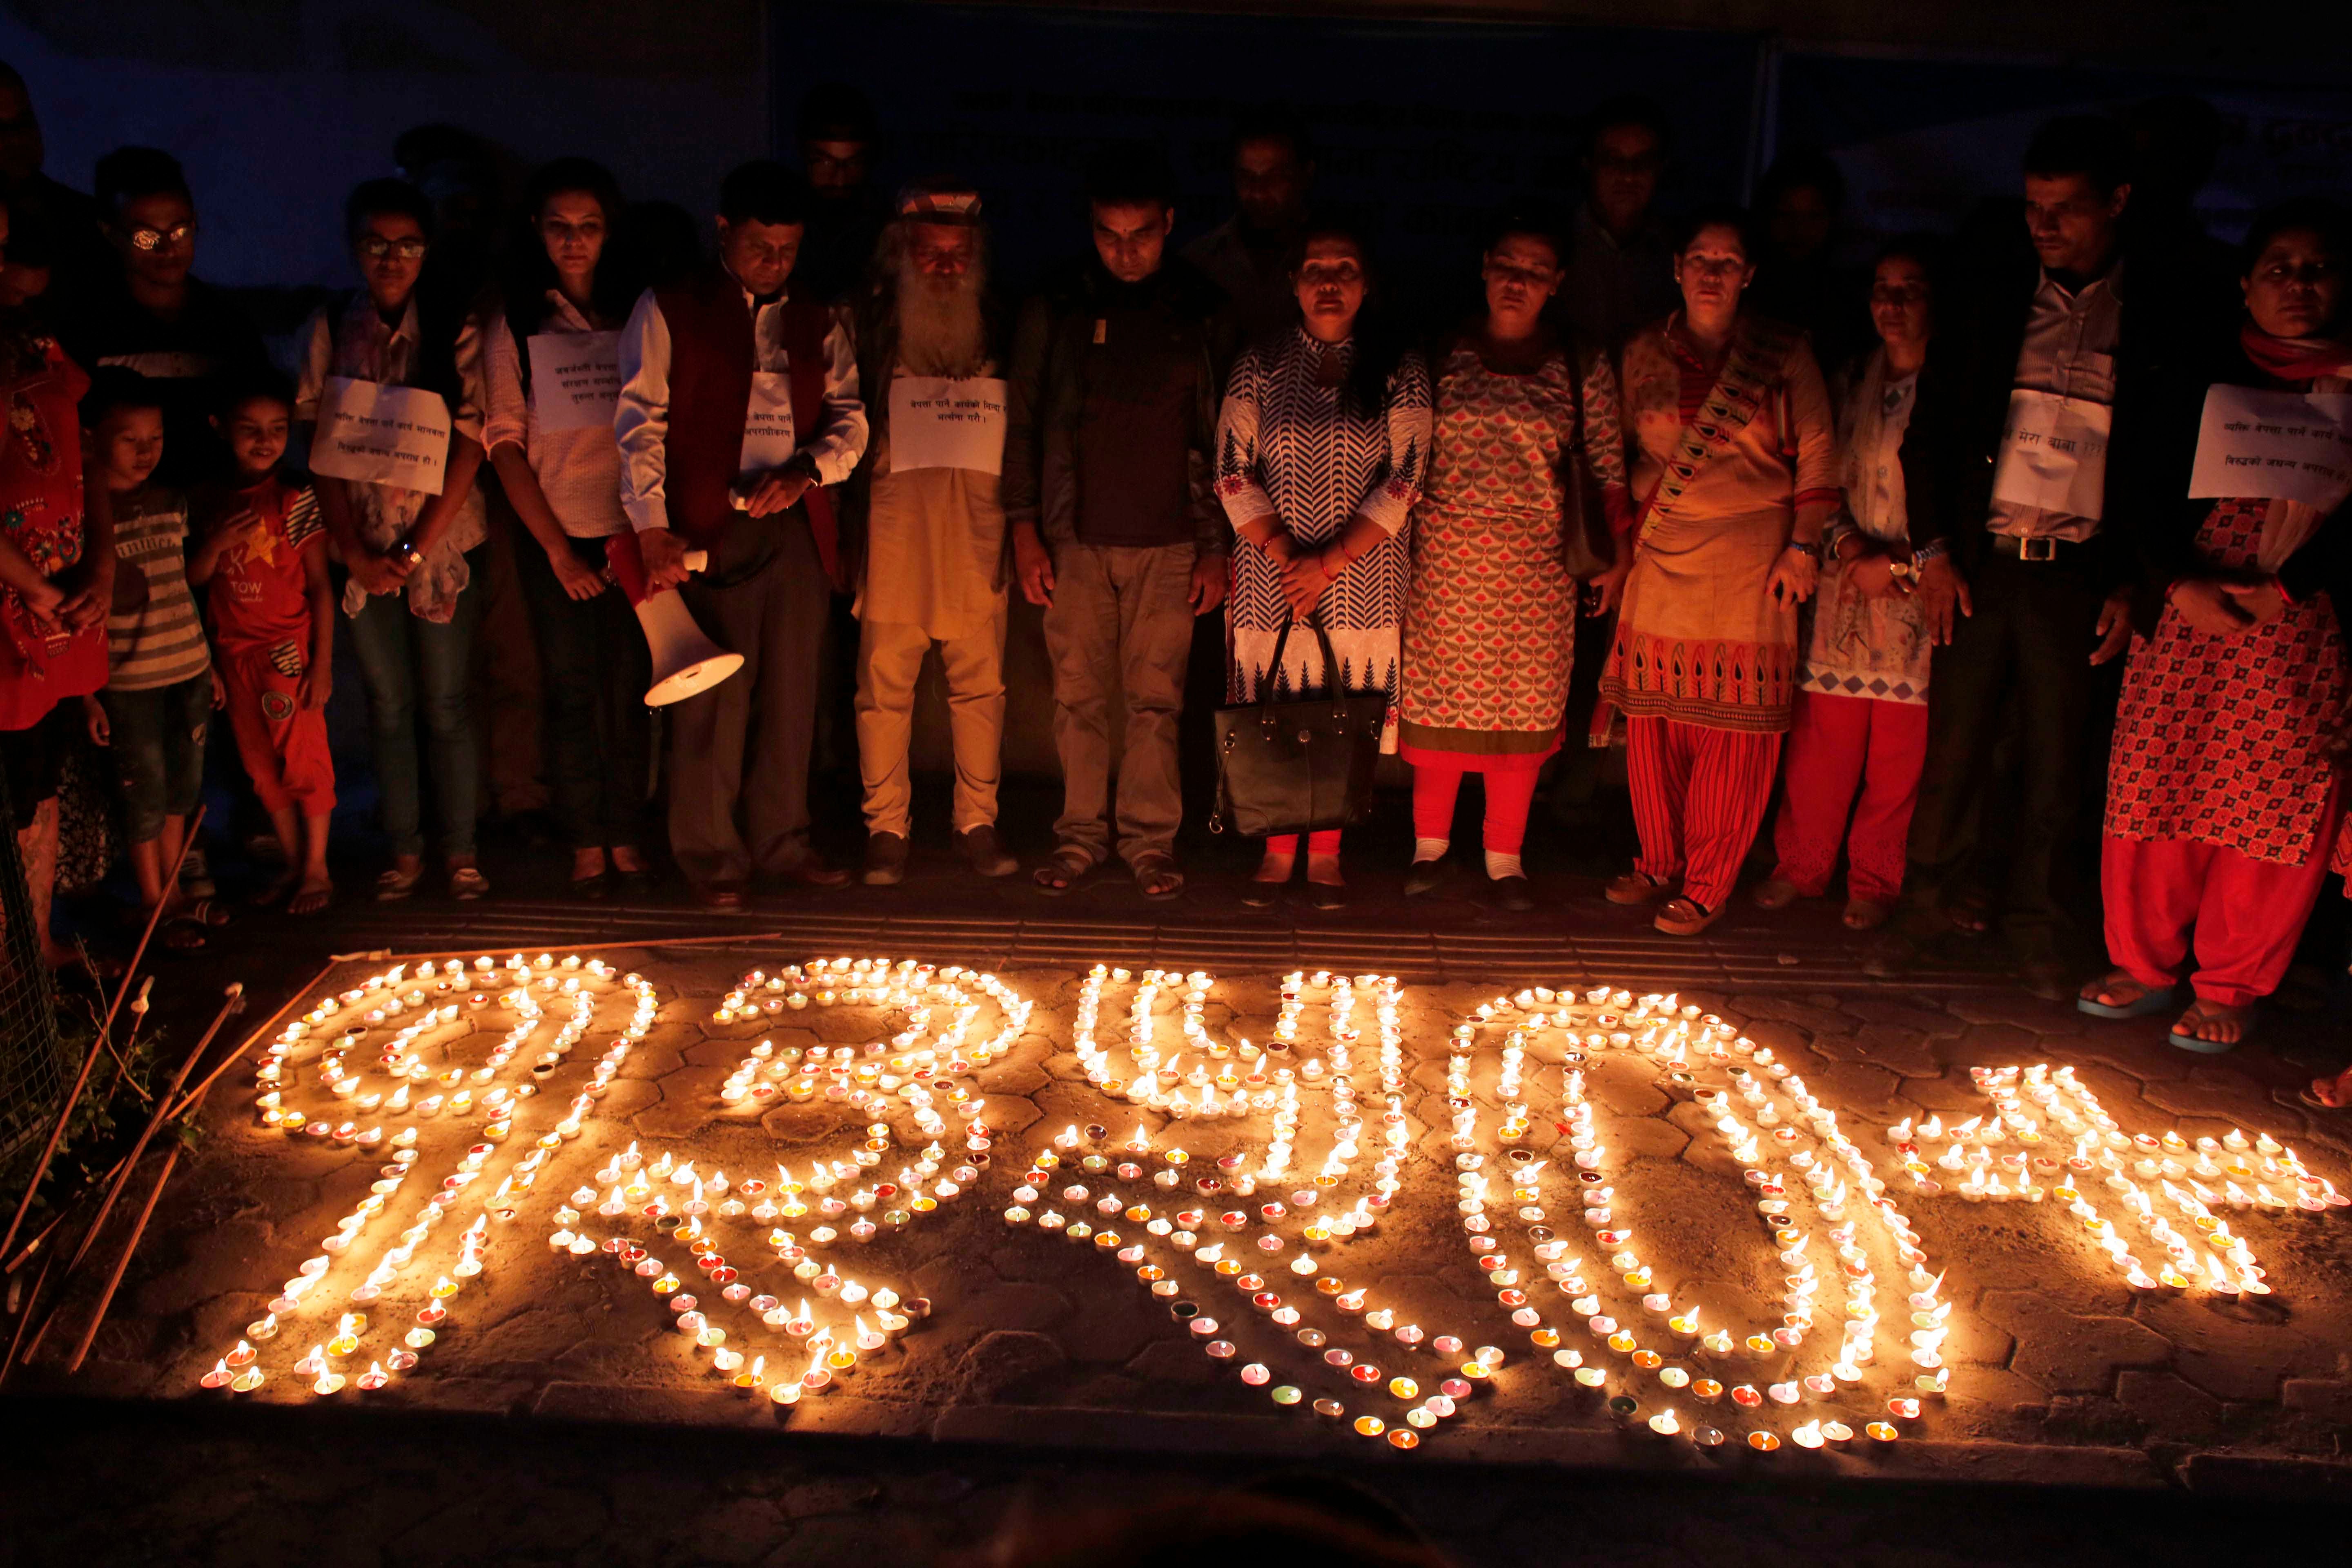 Nepalese human rights activists and relatives of disappeared persons, make a formation with lighted candles that reads 1350+ (referring to the number of victims) at an event to mark the International Day of the Disappeared in Kathmandu, Nepal, August 30, 2017.